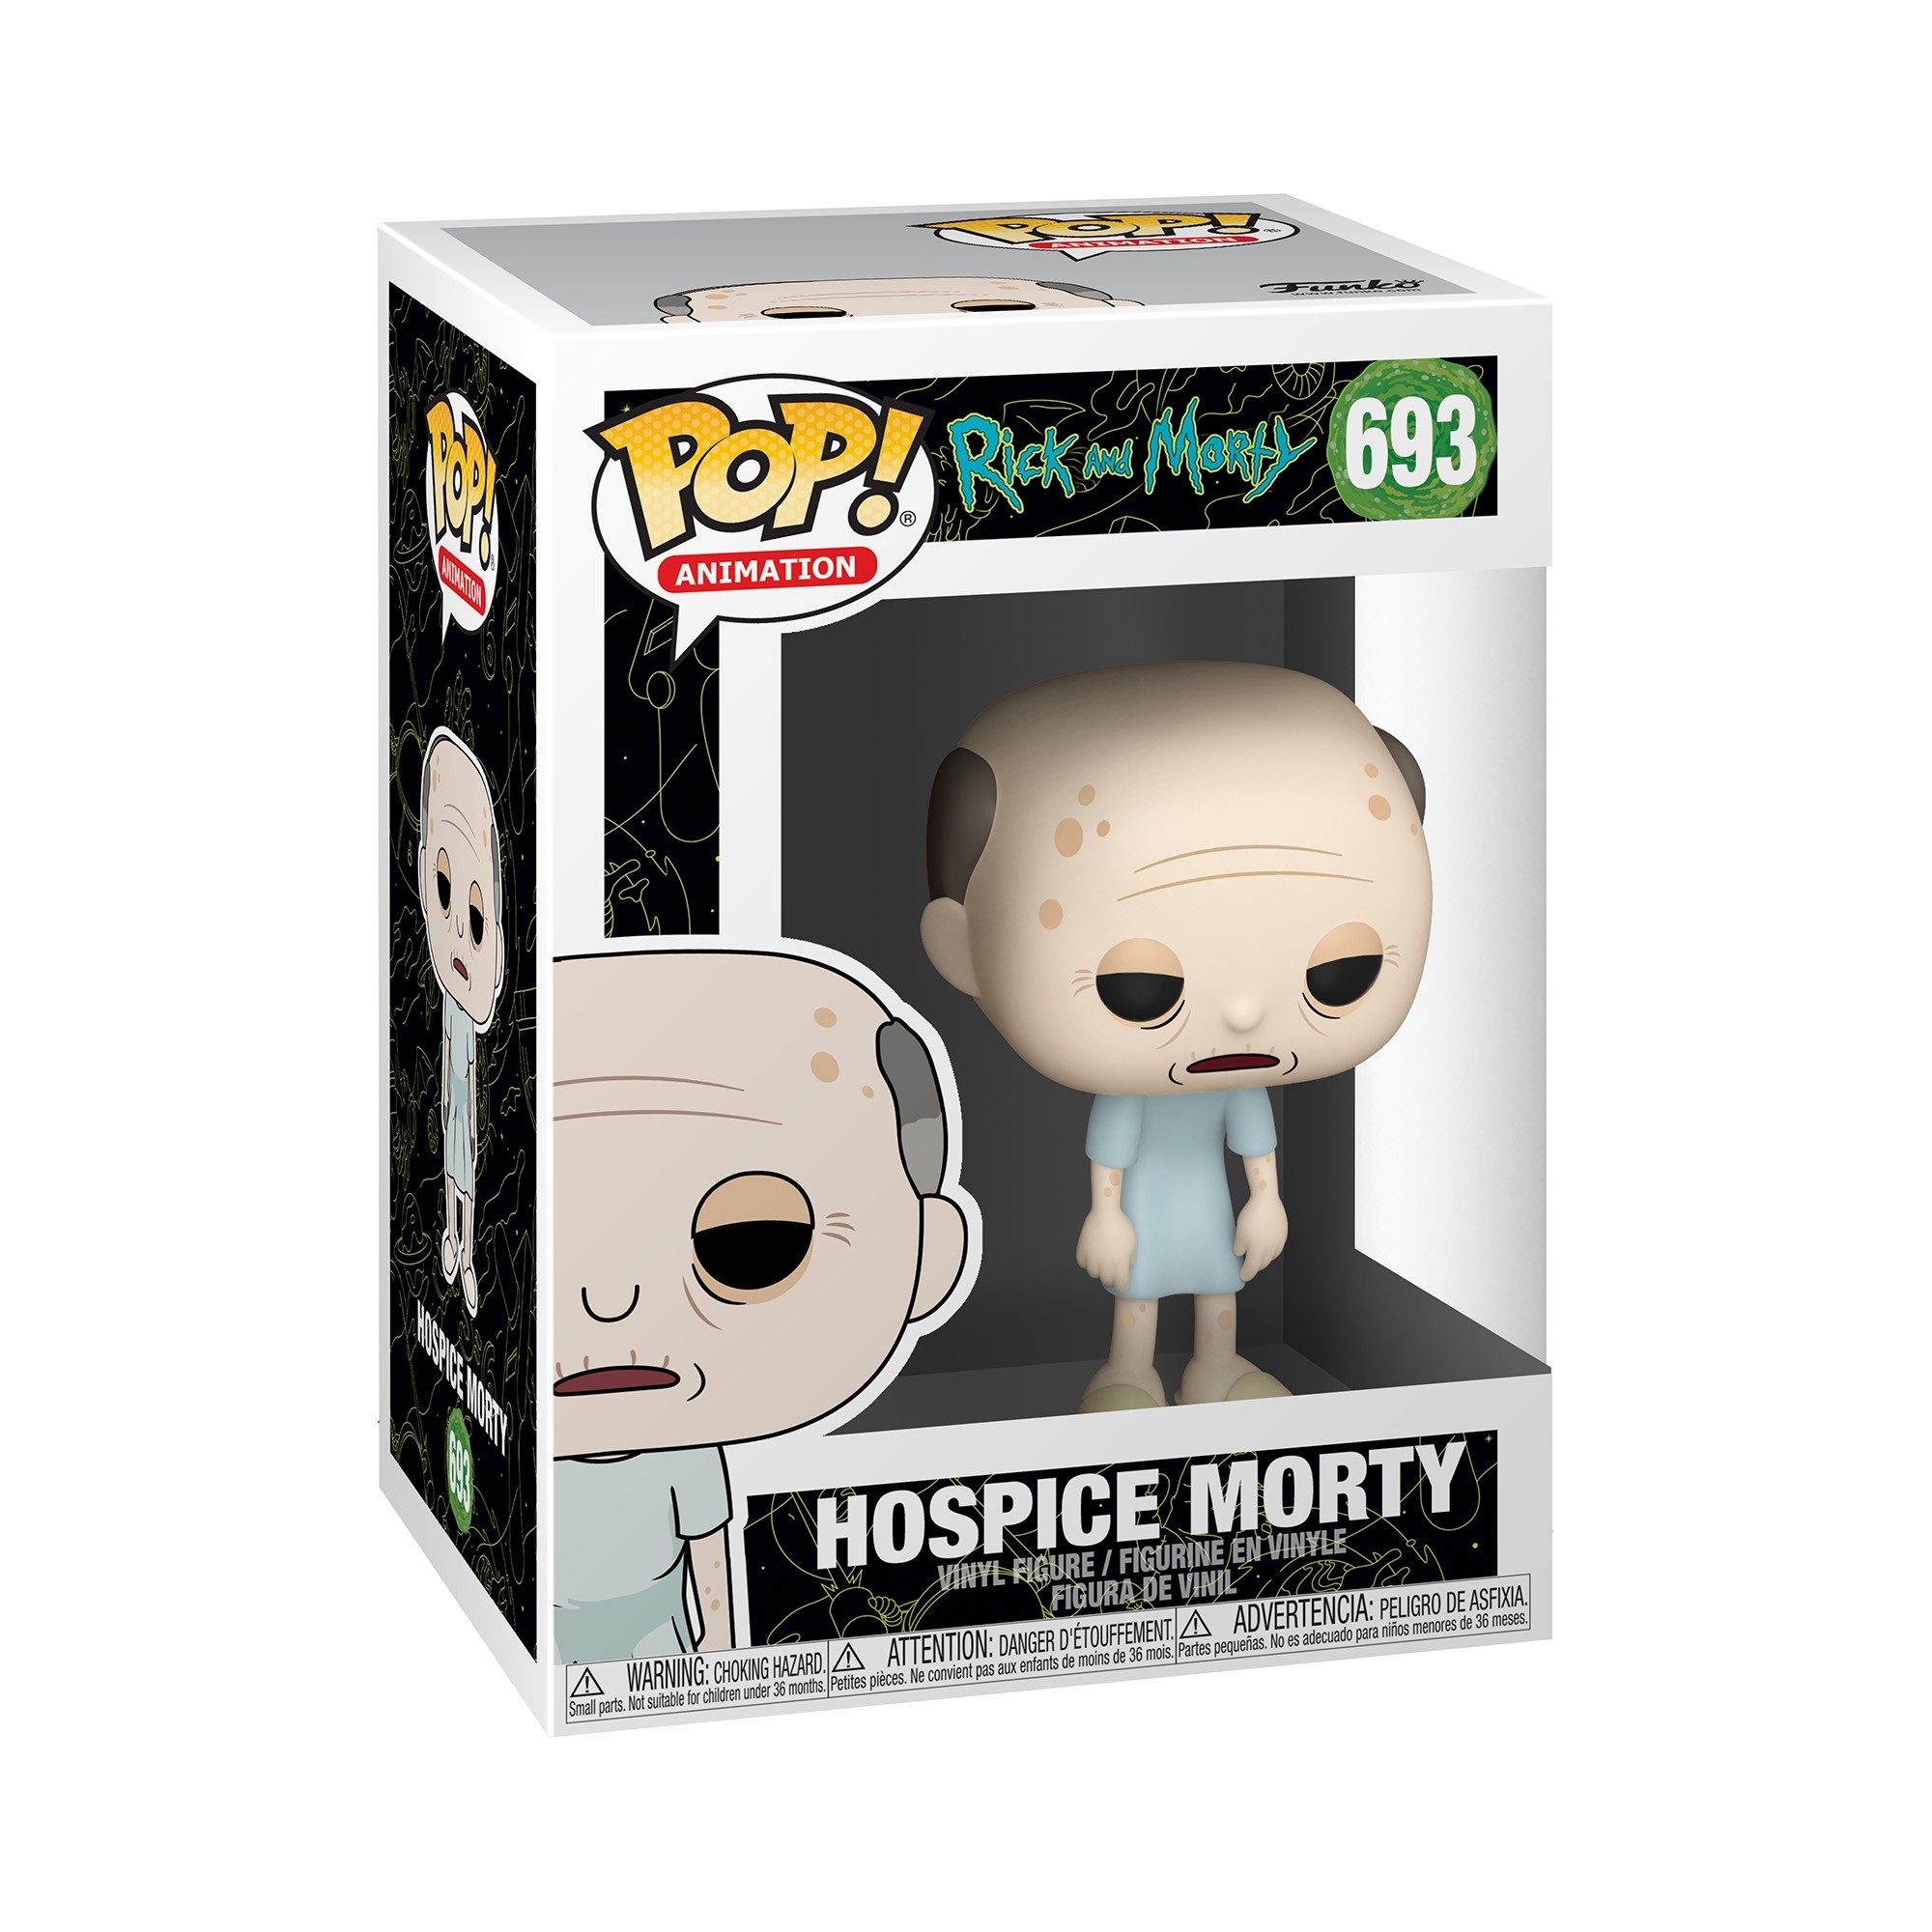 POP! Animation: Rick and Morty - Hospice Morty 